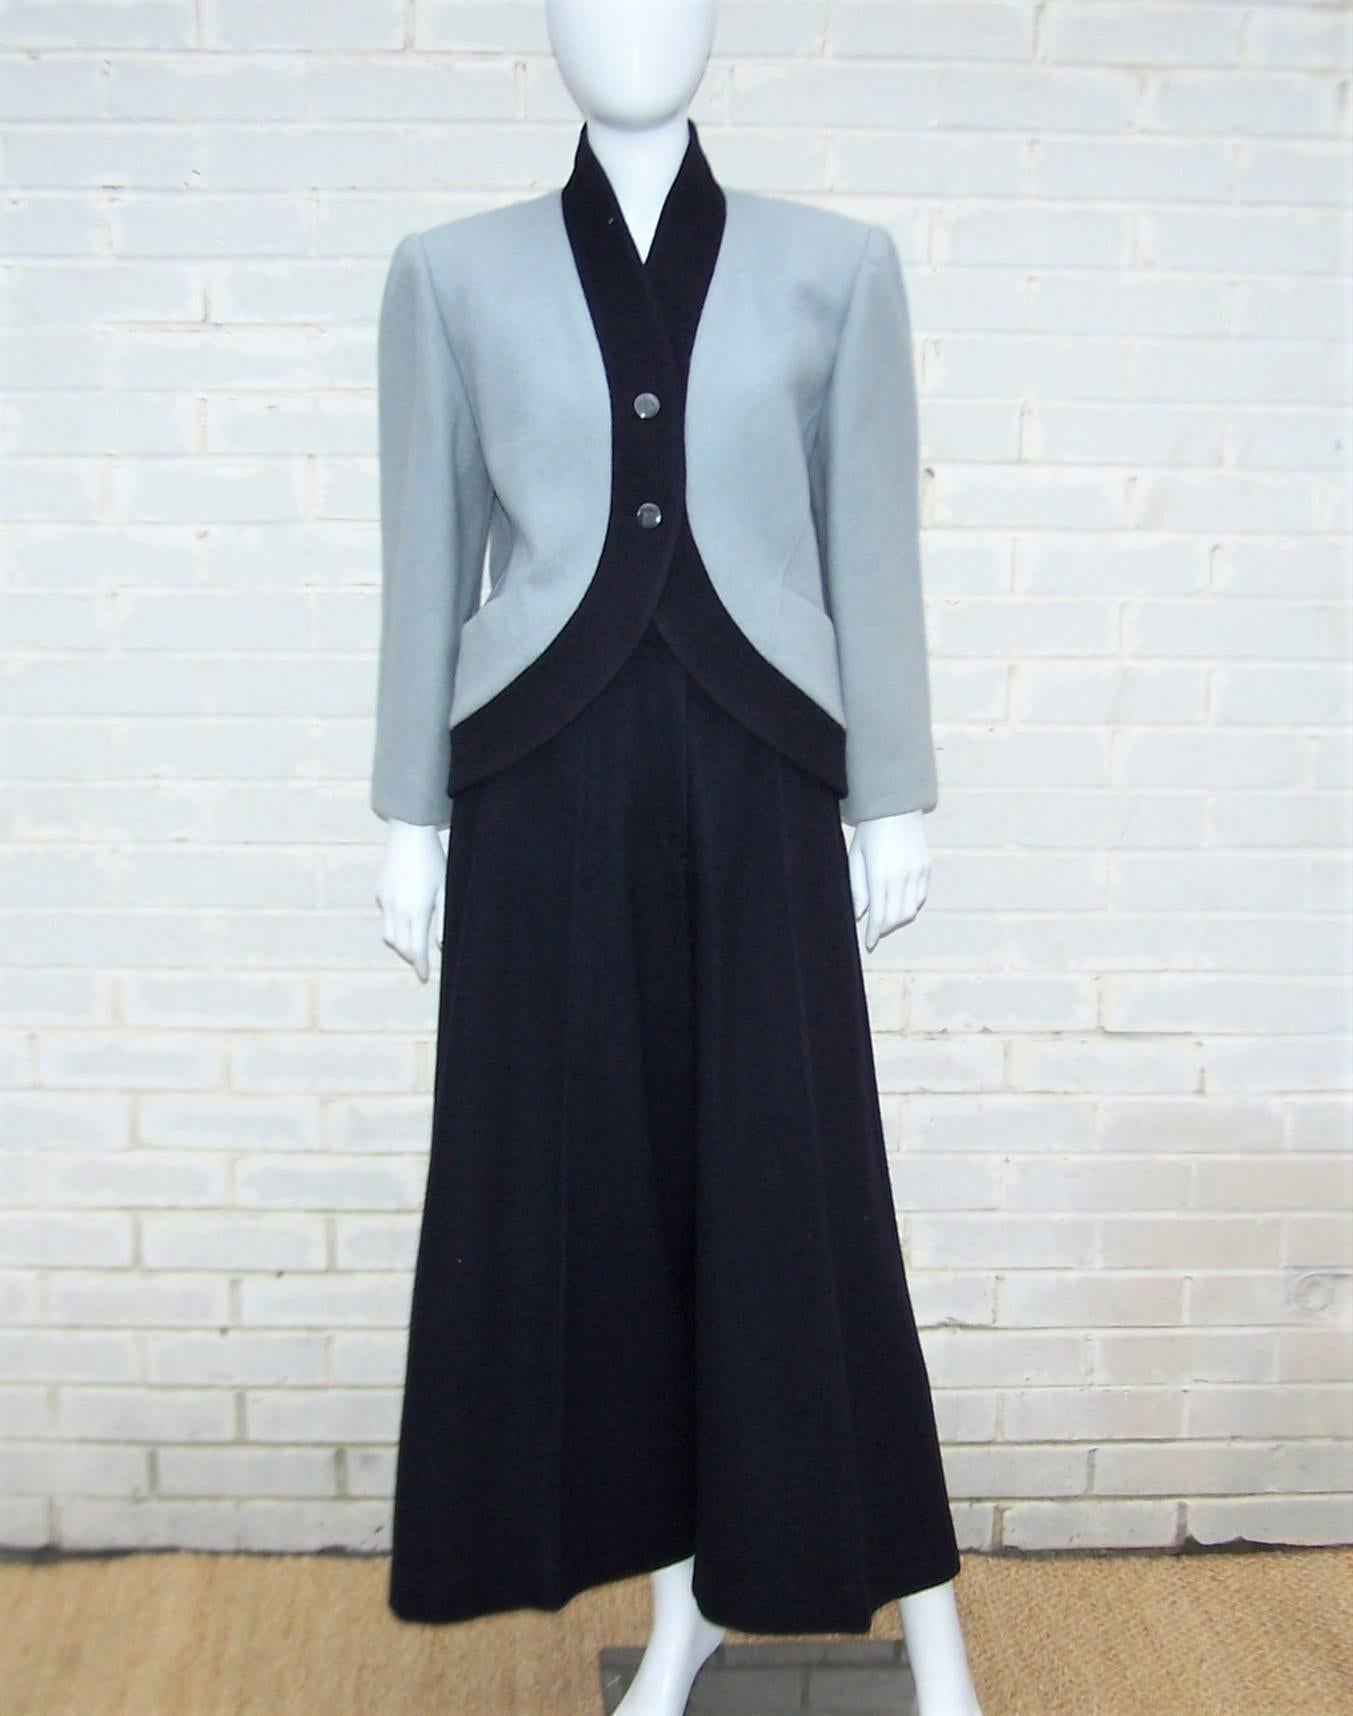 There is something decidedly exotic about this 1980's Karl Lagerfeld wool pant suit.  The boxy jacket with a cutaway button front opening is a dove gray trimmed in midnight blue.  The molded strong shoulder line is an expert mix of a nostalgic